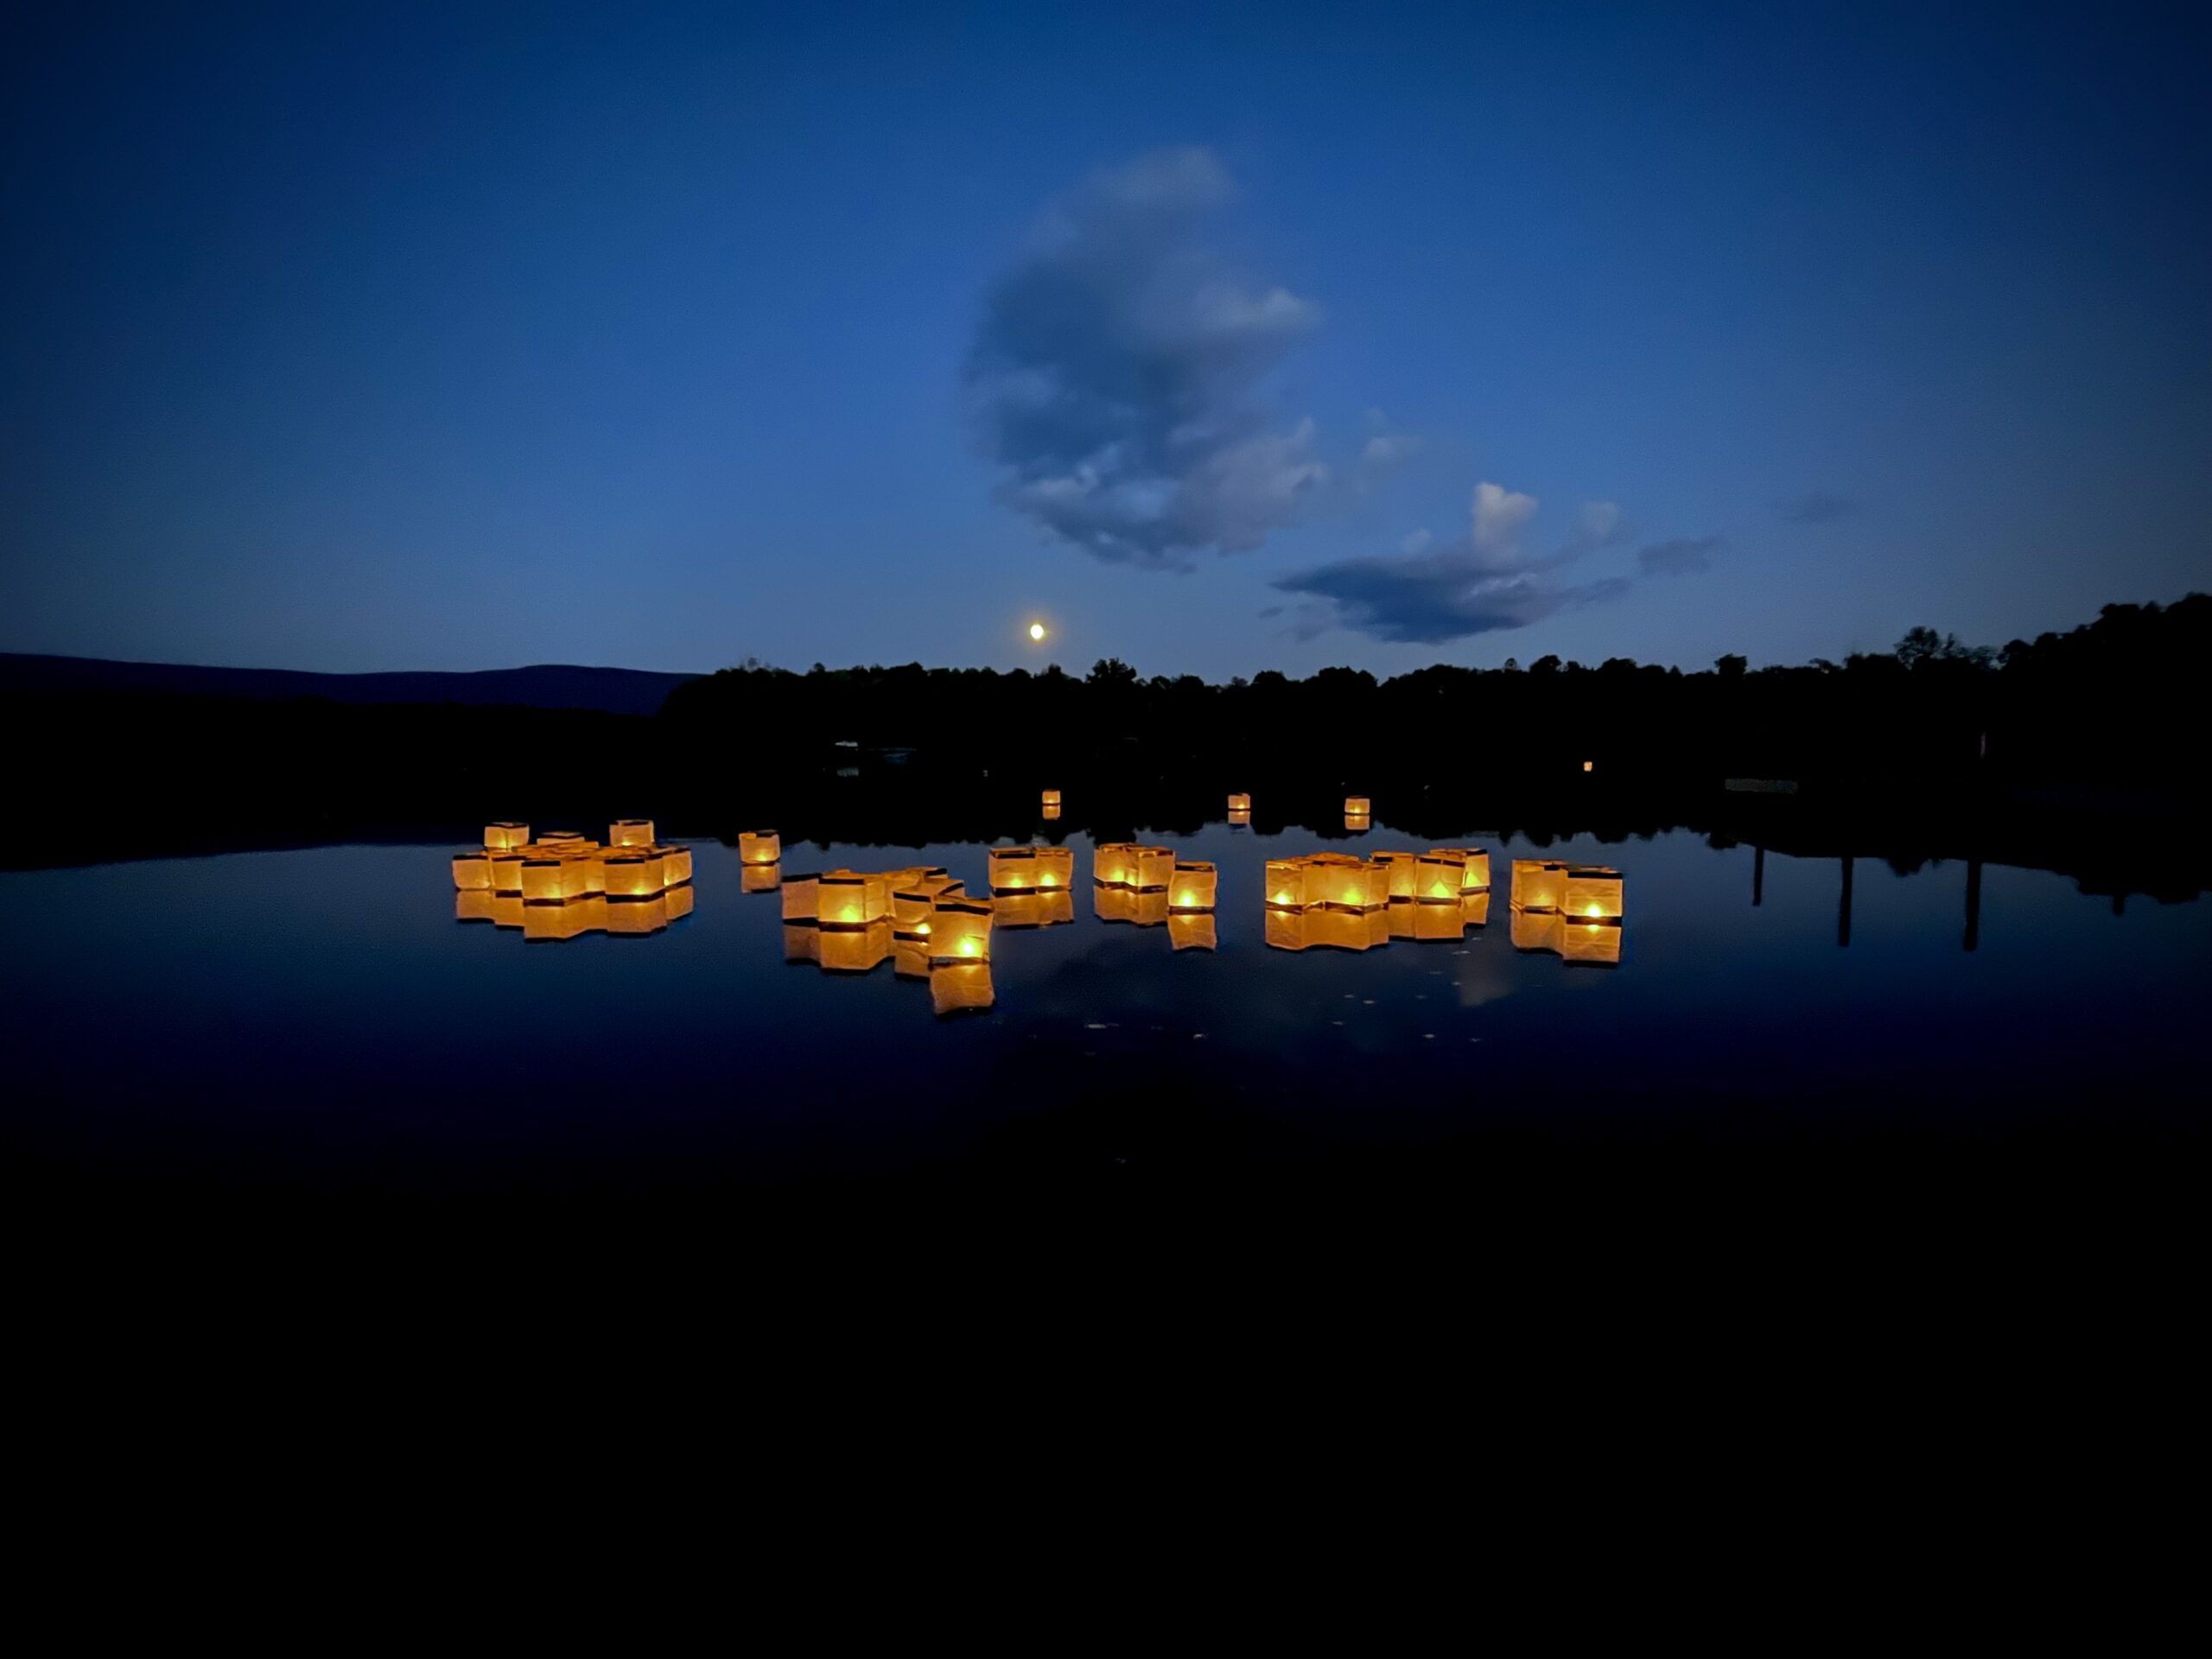 Several glowing paper lanterns float on a still dark lake against a blue night sky, full moon, tree line, and a few clouds.